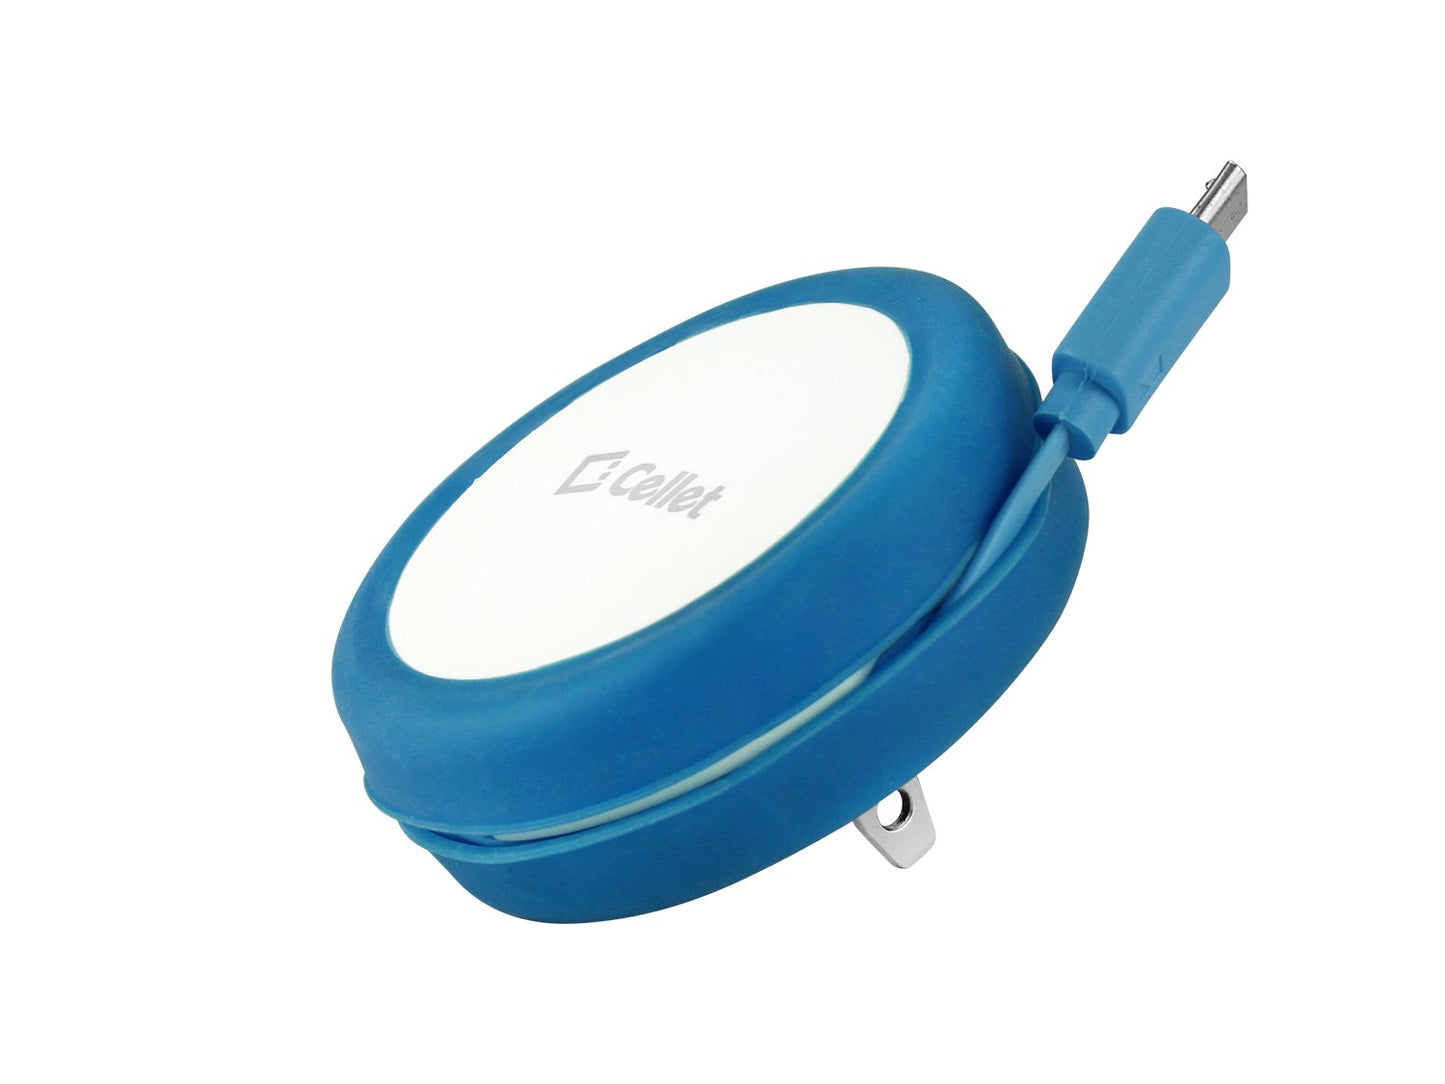 TMMICROBL - Cellet Cord Keeper 5Watt (1Amp) Micro USB Home Wall Charger - Blue